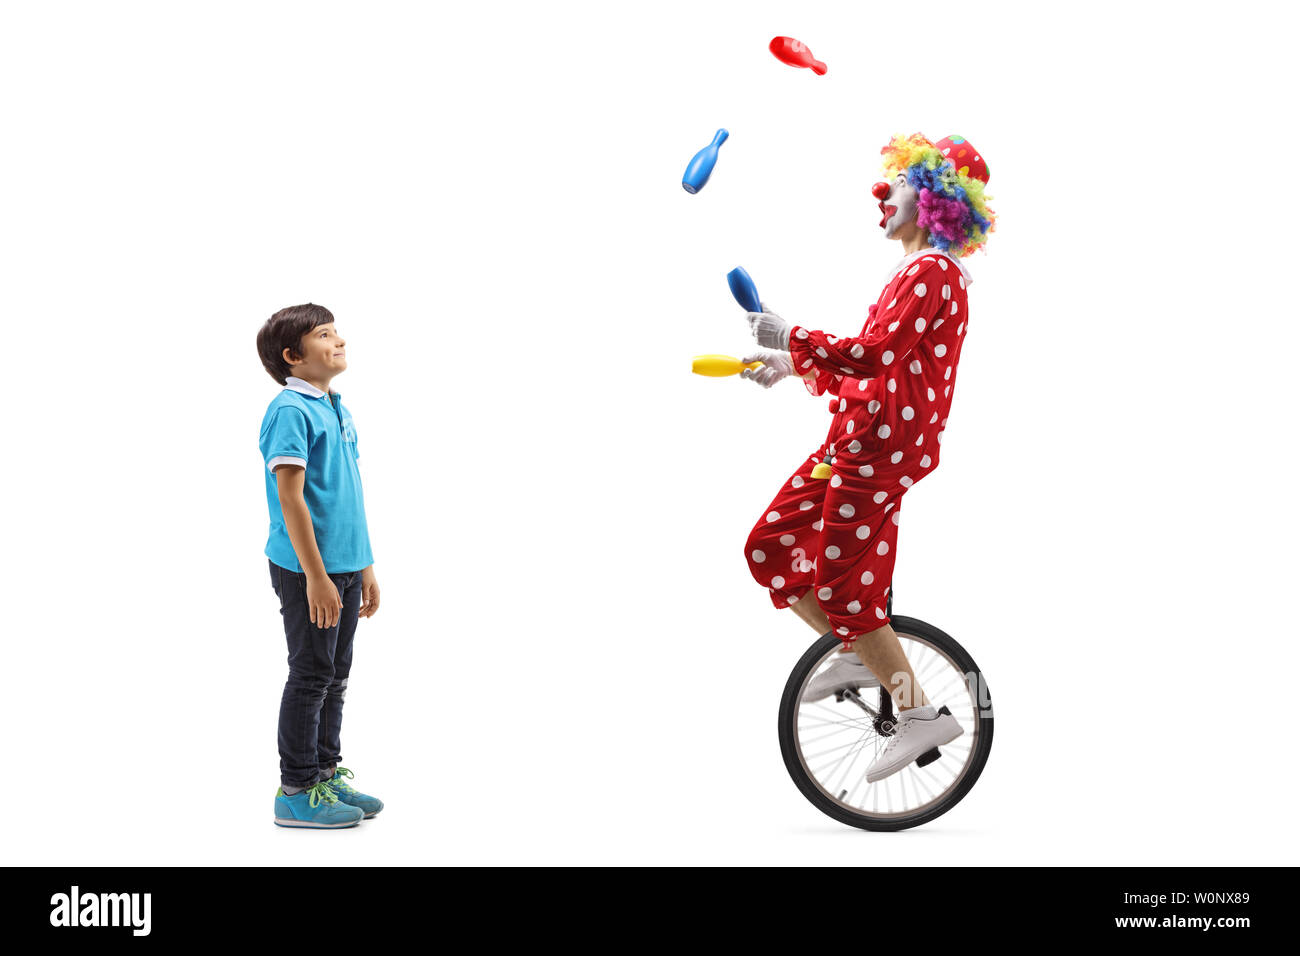 Full length profile shot of a boy watching a clown juggling and riding a unicycle isolated on white background Stock Photo